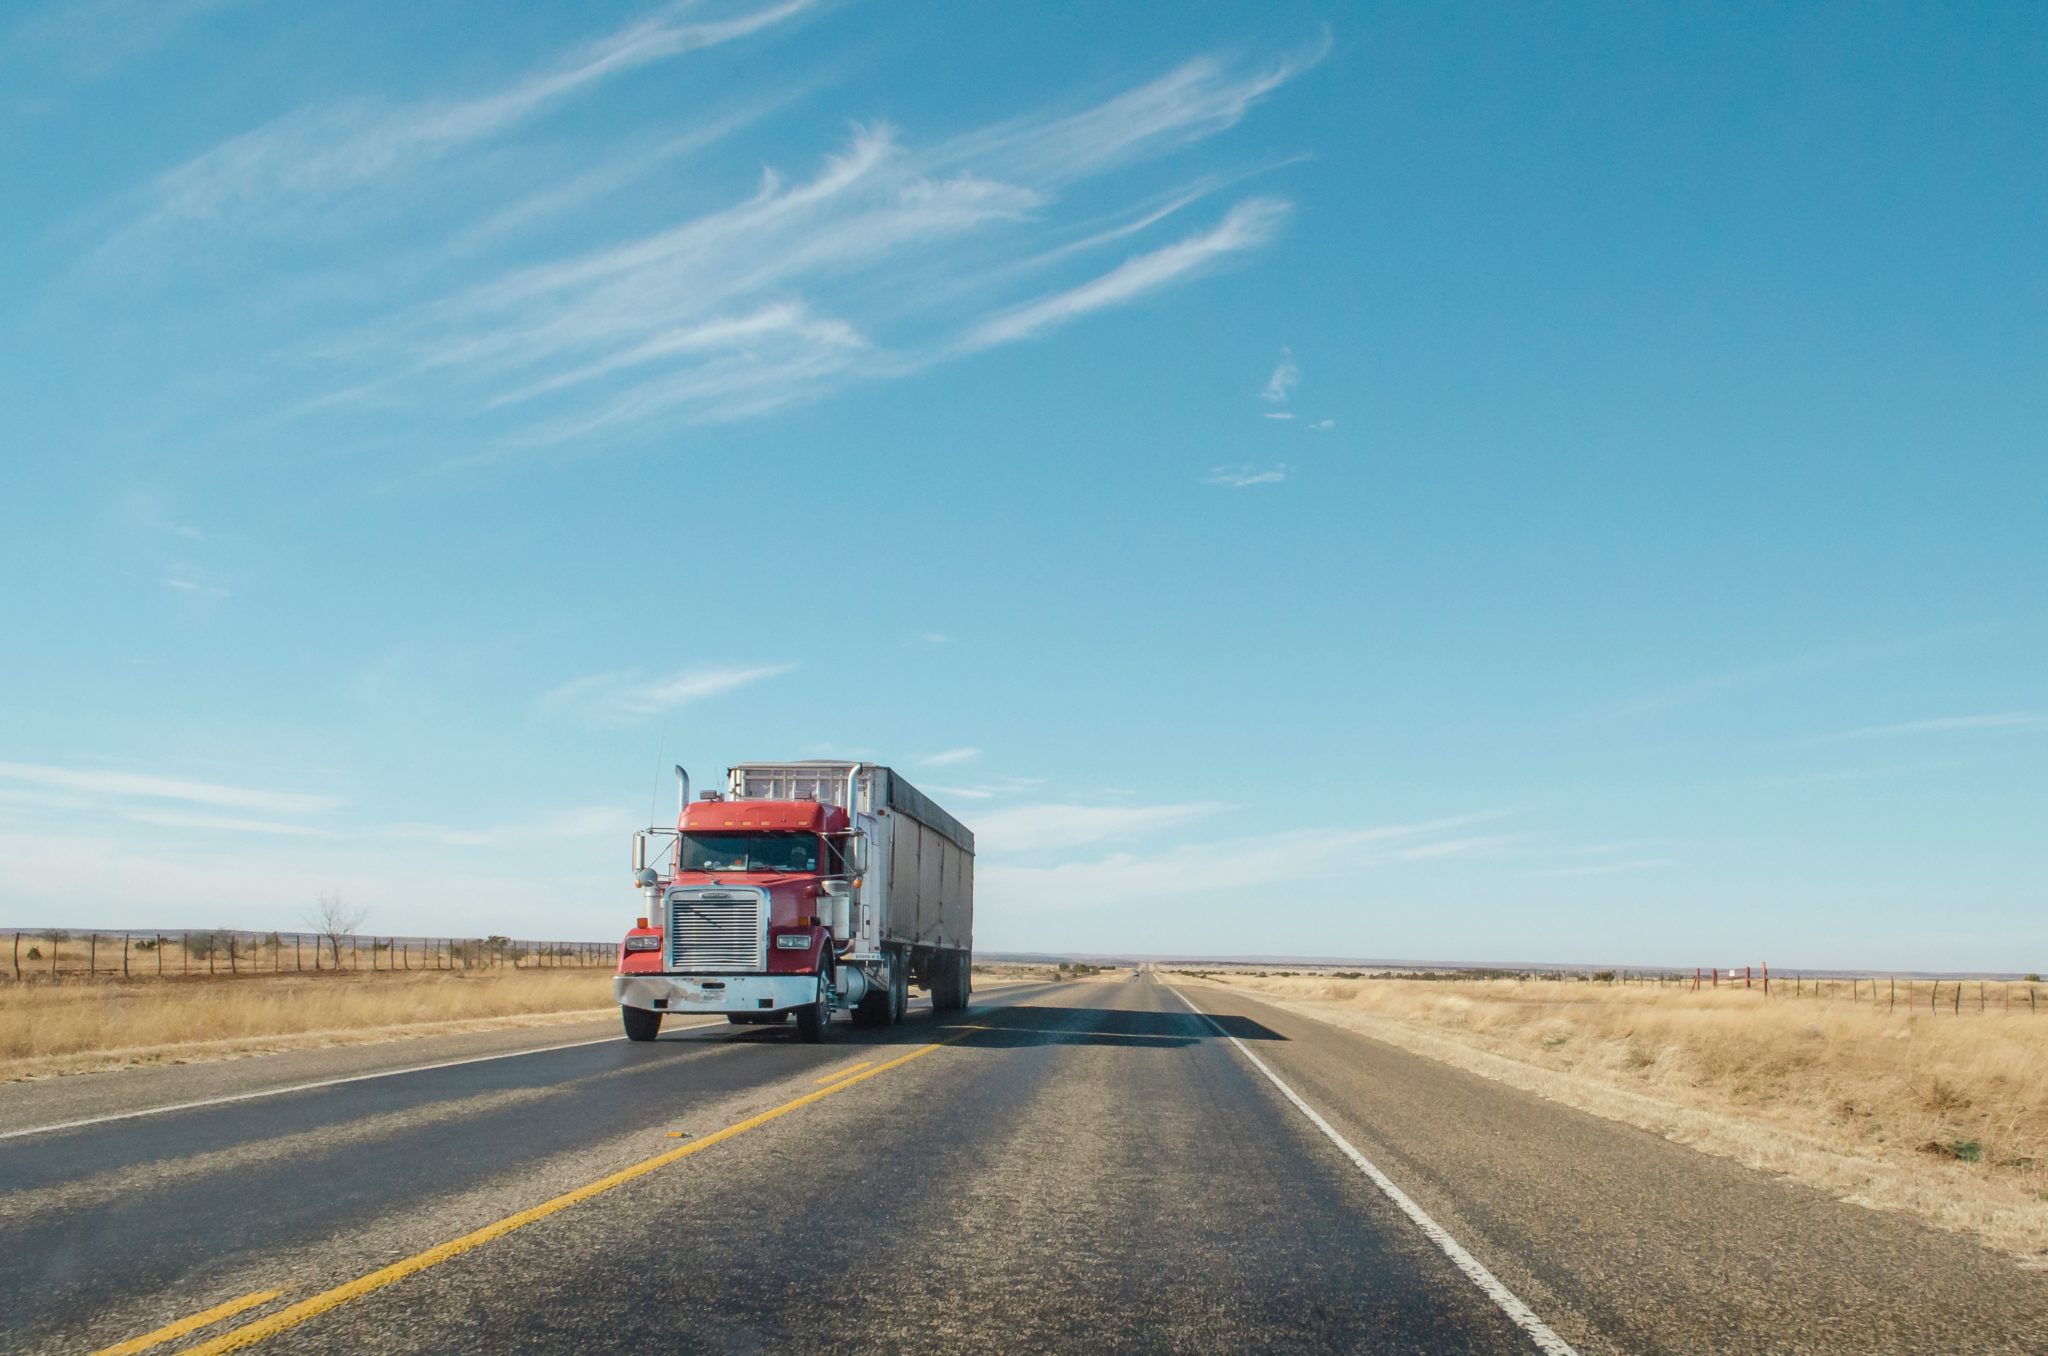 Looking to Start a Career in Trucking but not sure How?